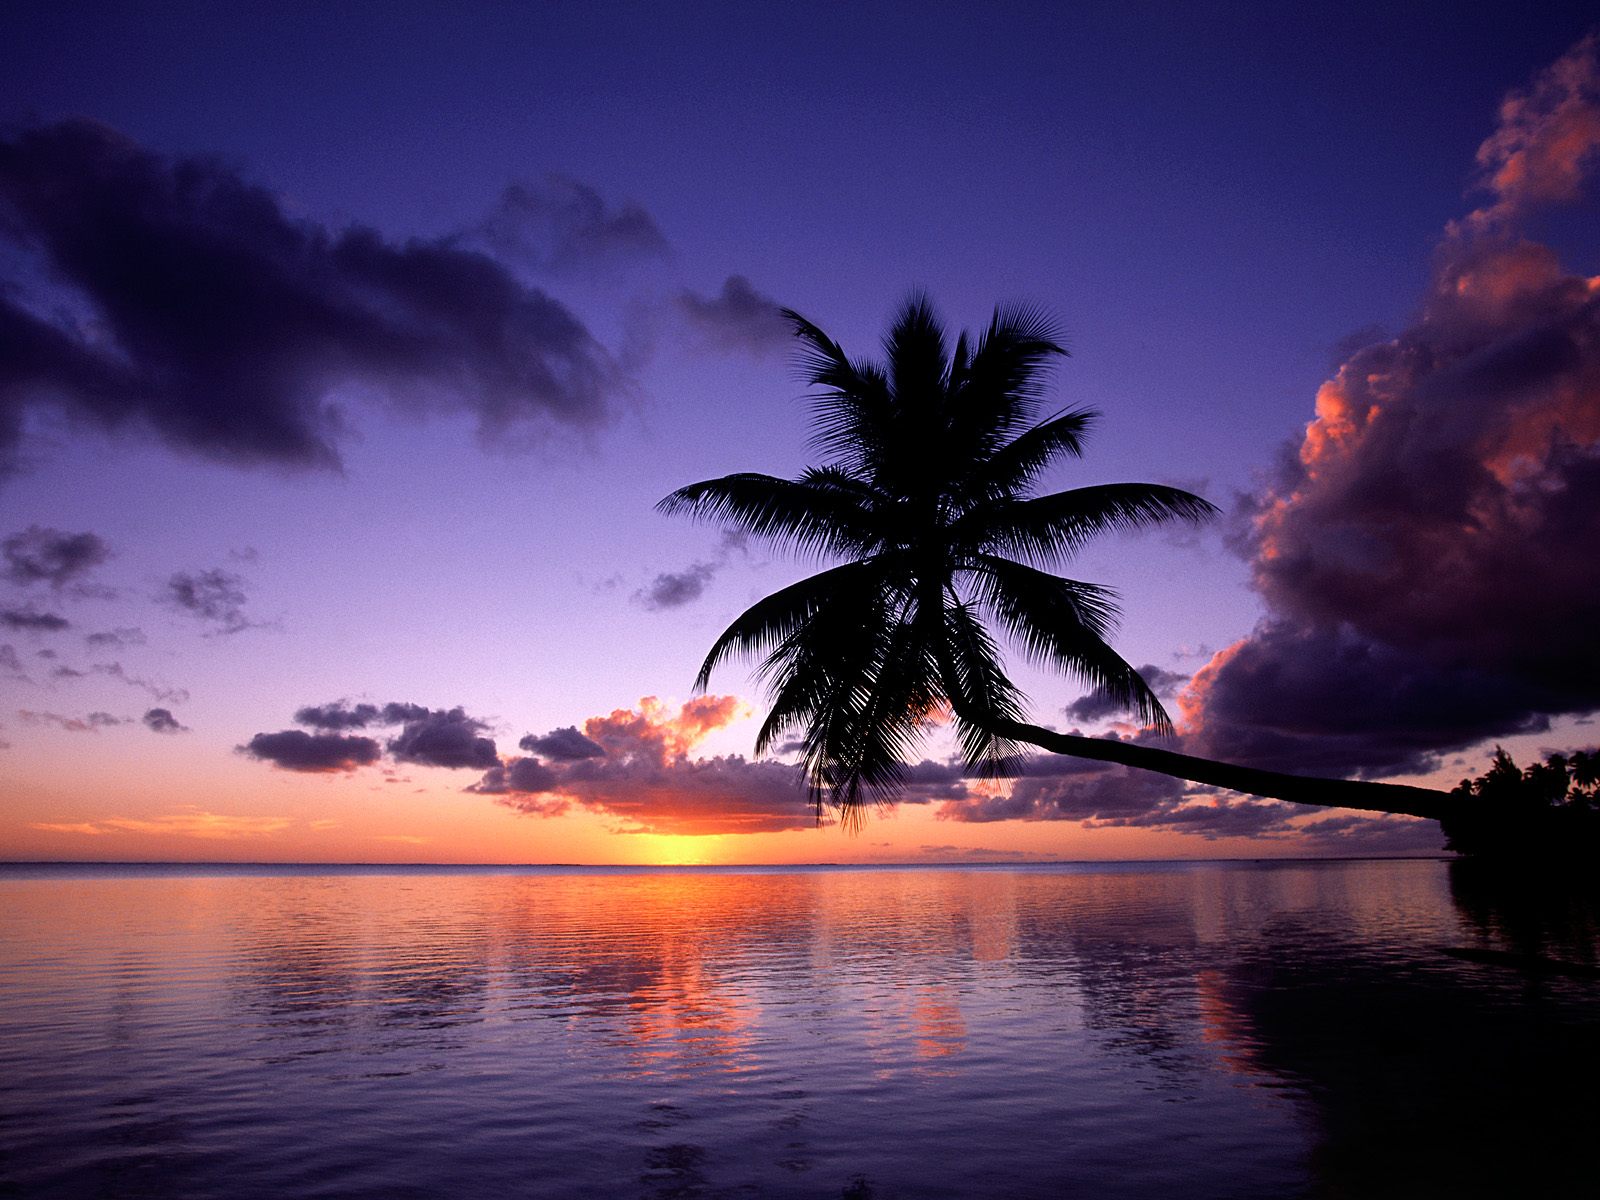 Serene dawn at the seaside with palm tree and clouds